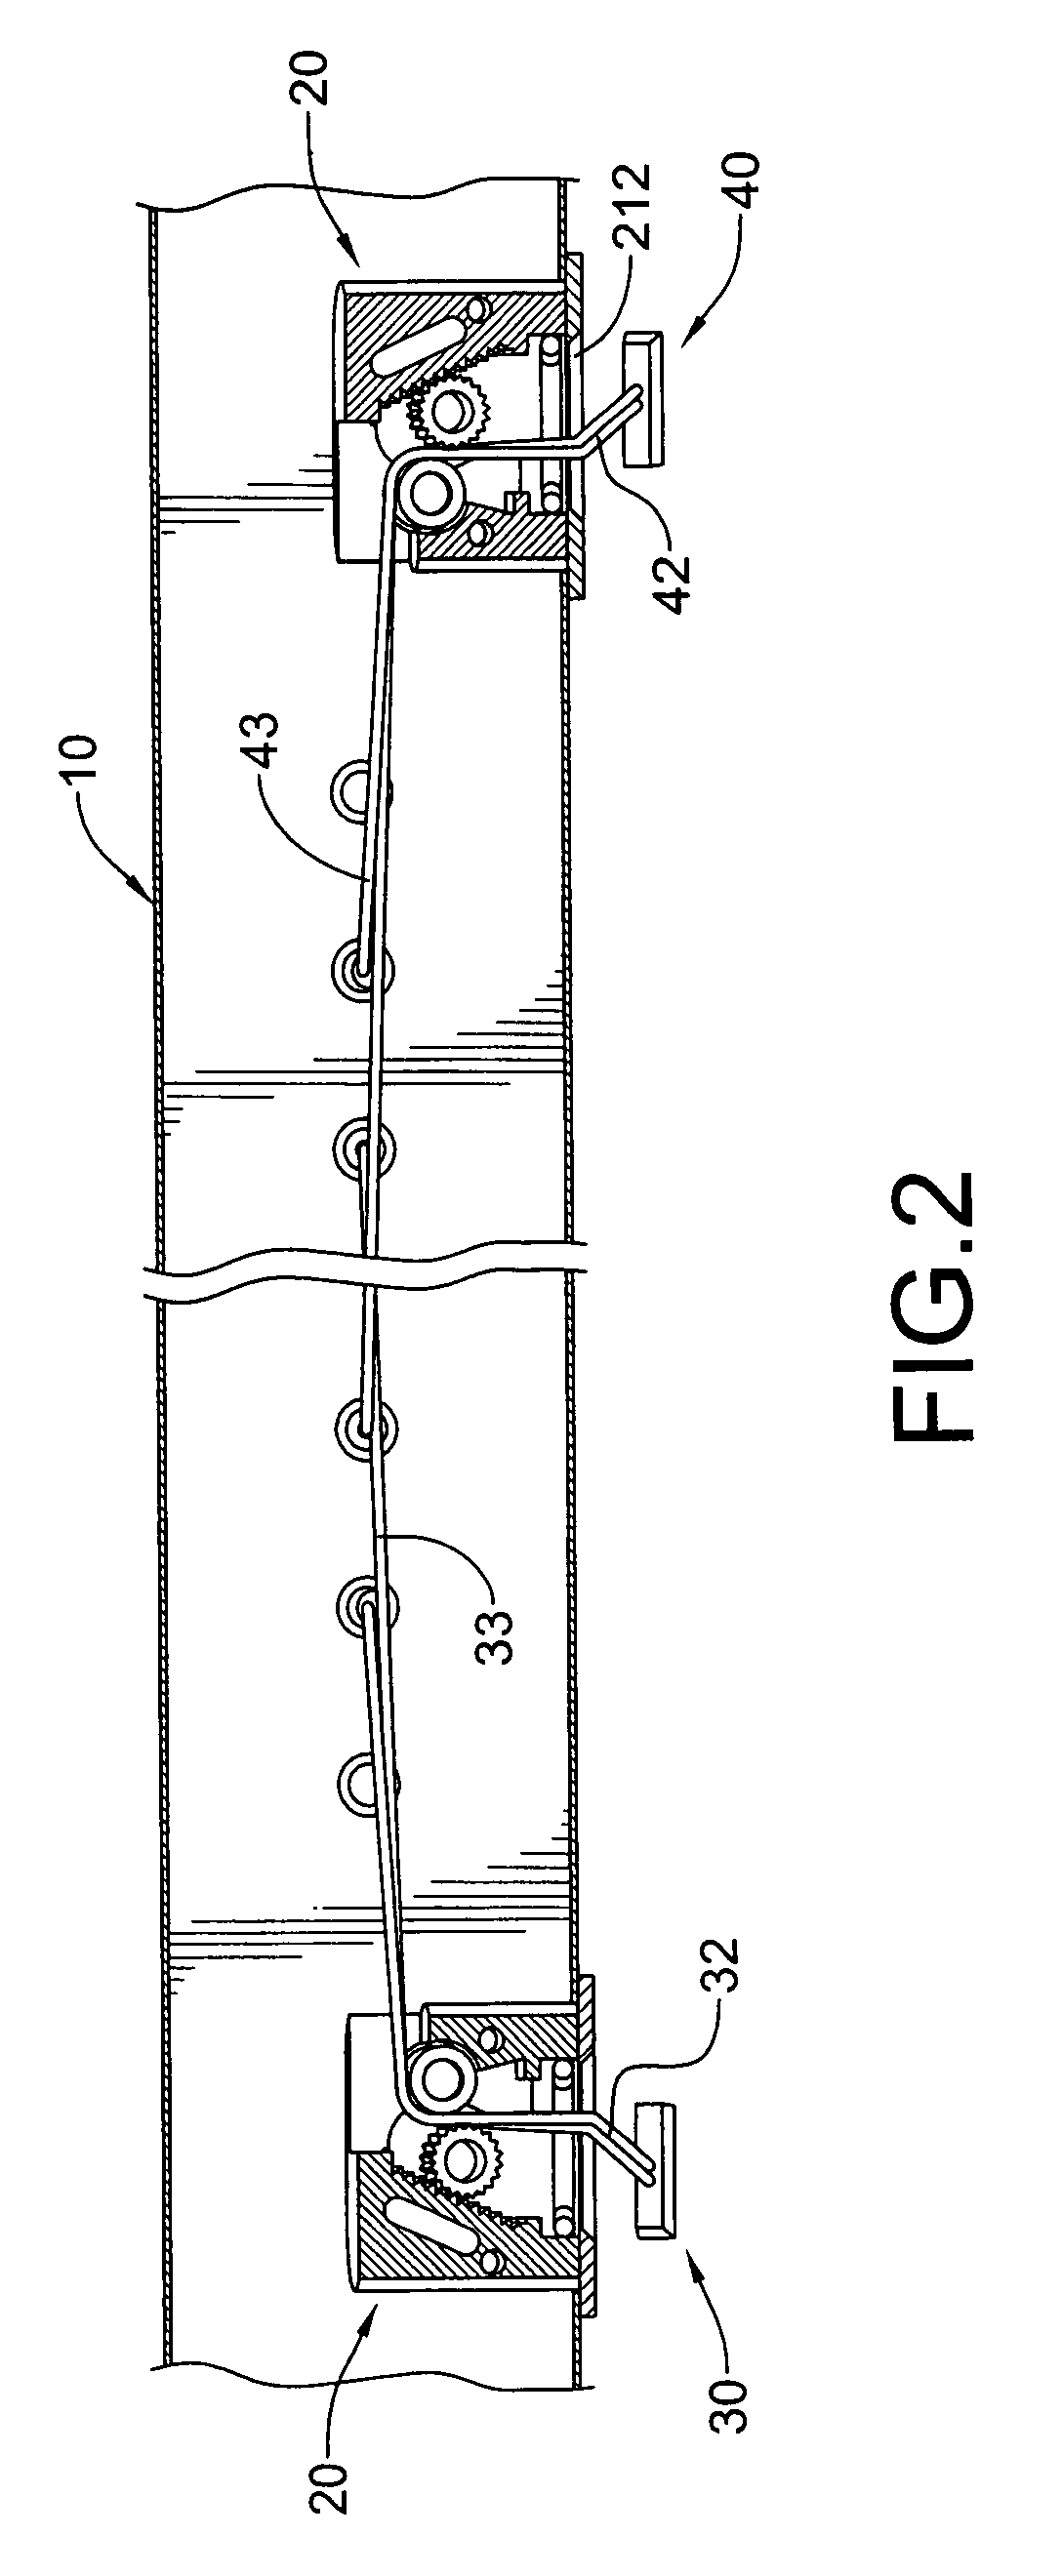 Window covering device